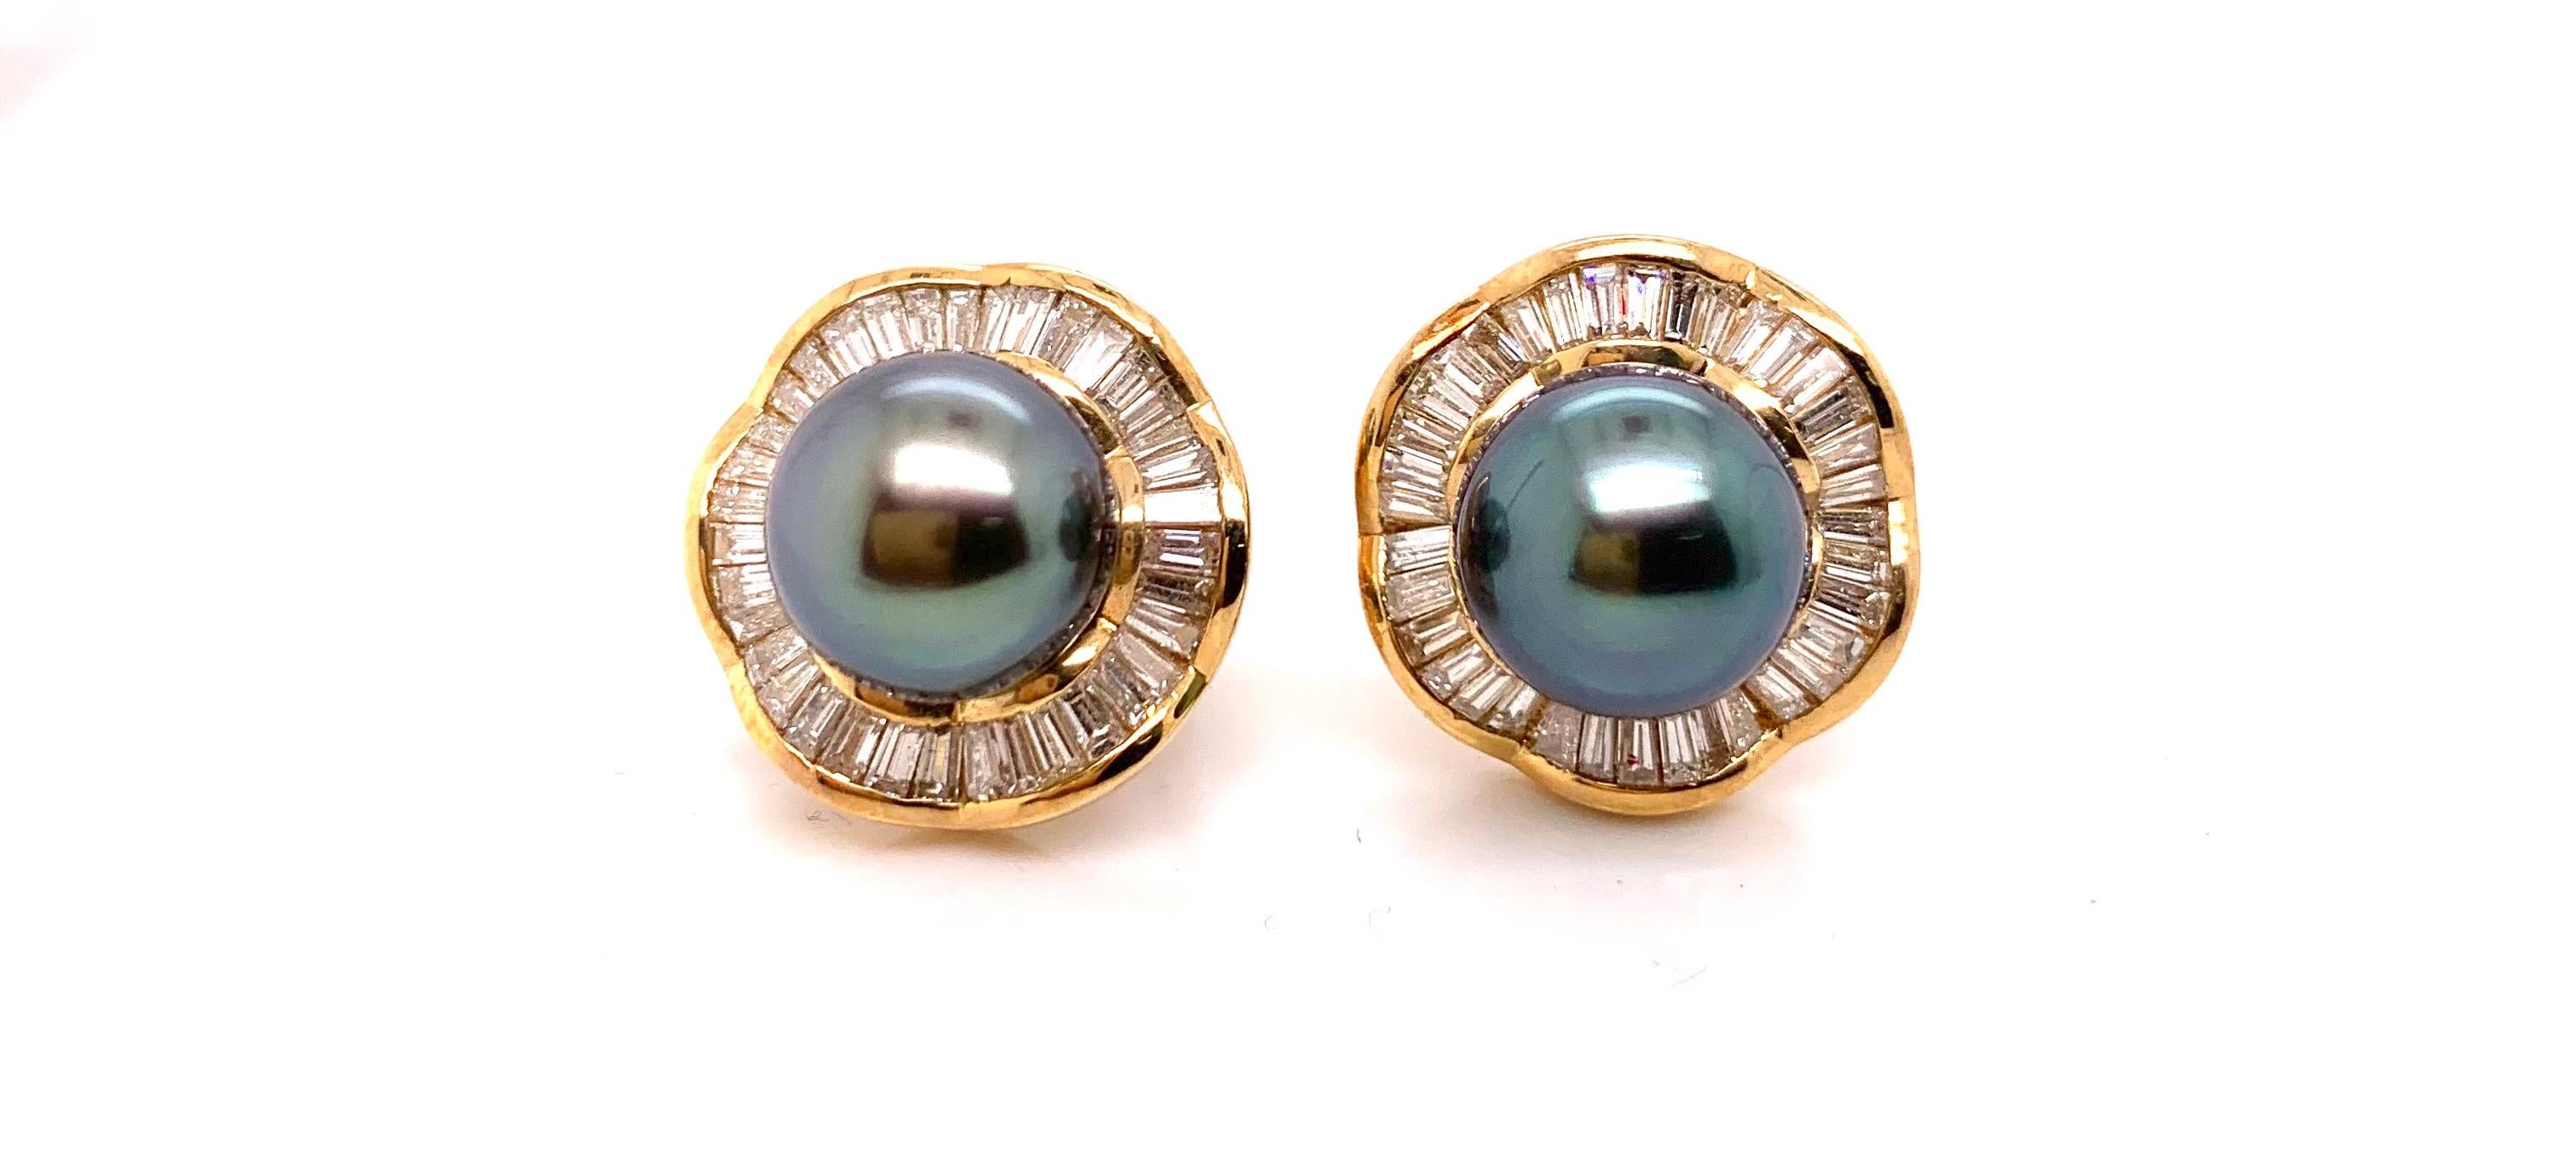 One of a Kind Natural Tahitian Pearl and Baguette Diamond Earrings 

Stones: Natural Tahitian Pearls
Dimensions: 10 x 10.5 MM 
Stones: Baguette Diamond
Stone Clarity: VS/SI Clarity
Stones: 90 Diamonds 
Stone Carat Weight: 1.50 Carat 
Material: 14K